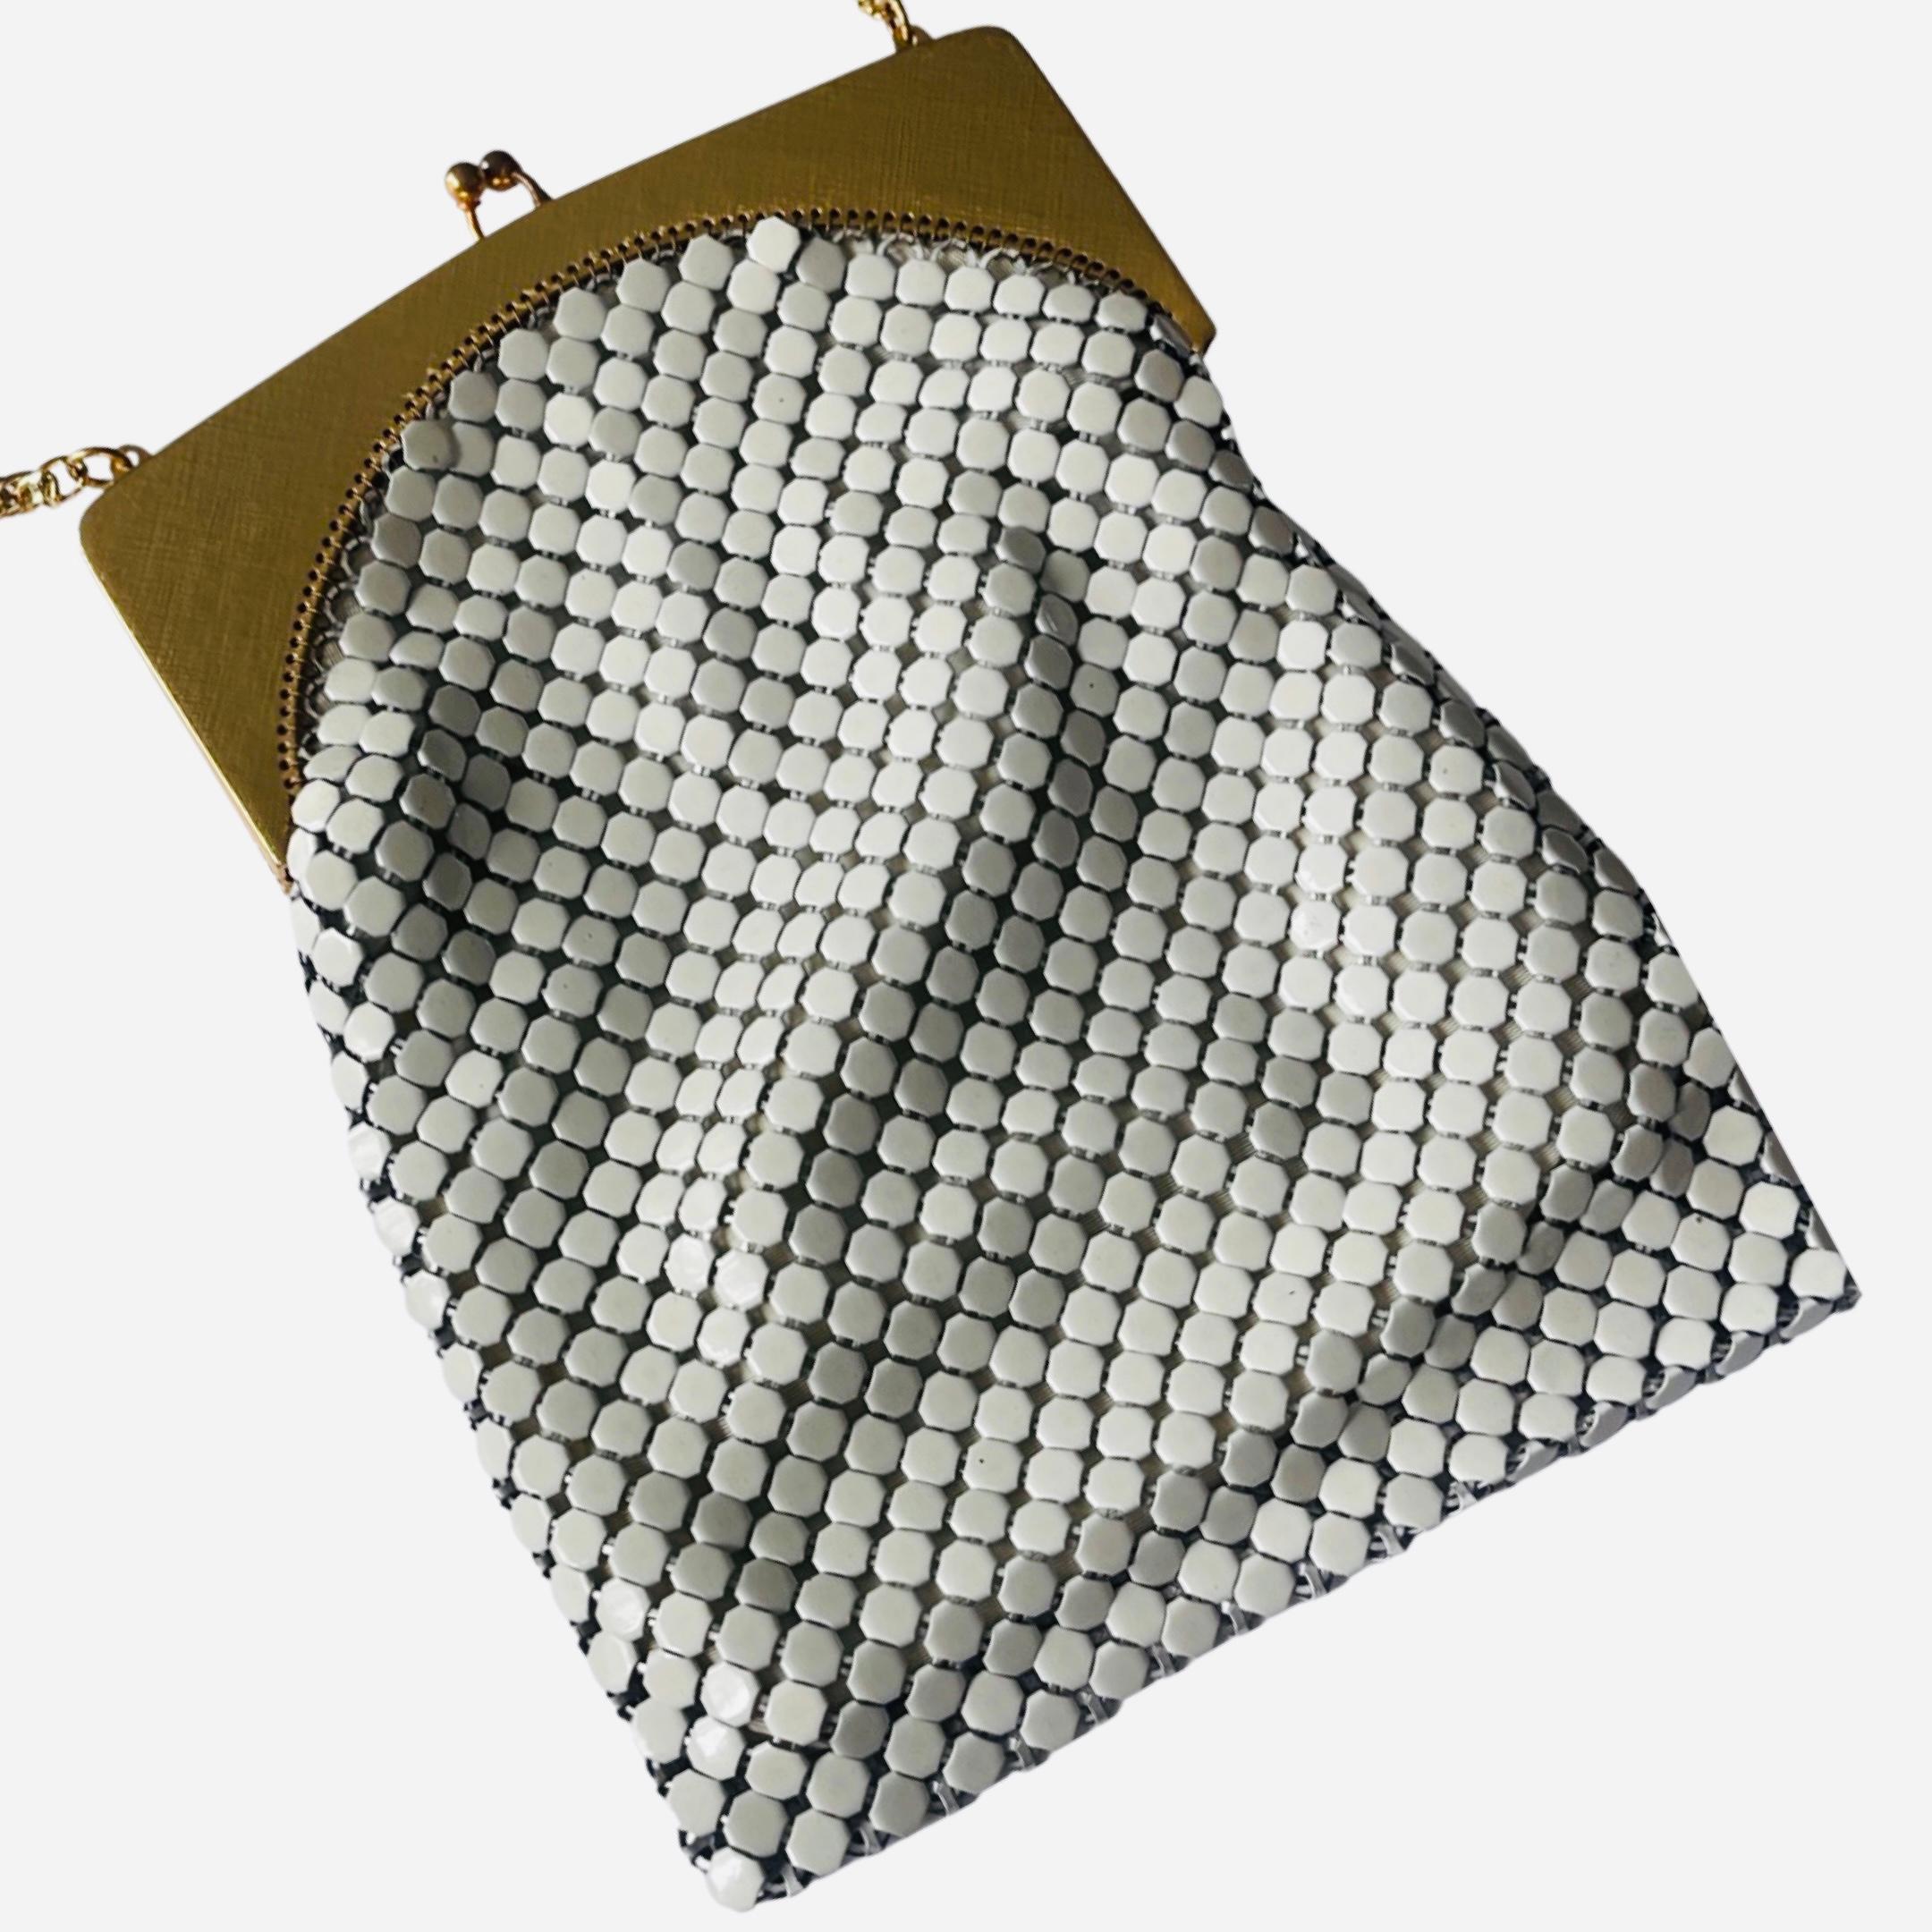 An ornate, rare piece of history is this Whiting & Davis mesh purse, Circa. The 1920s-1929.  This white-in-color antique chainmail purse is framed in gold with a decorative frame that has a figural face, along with leaves and roses.  

The gold